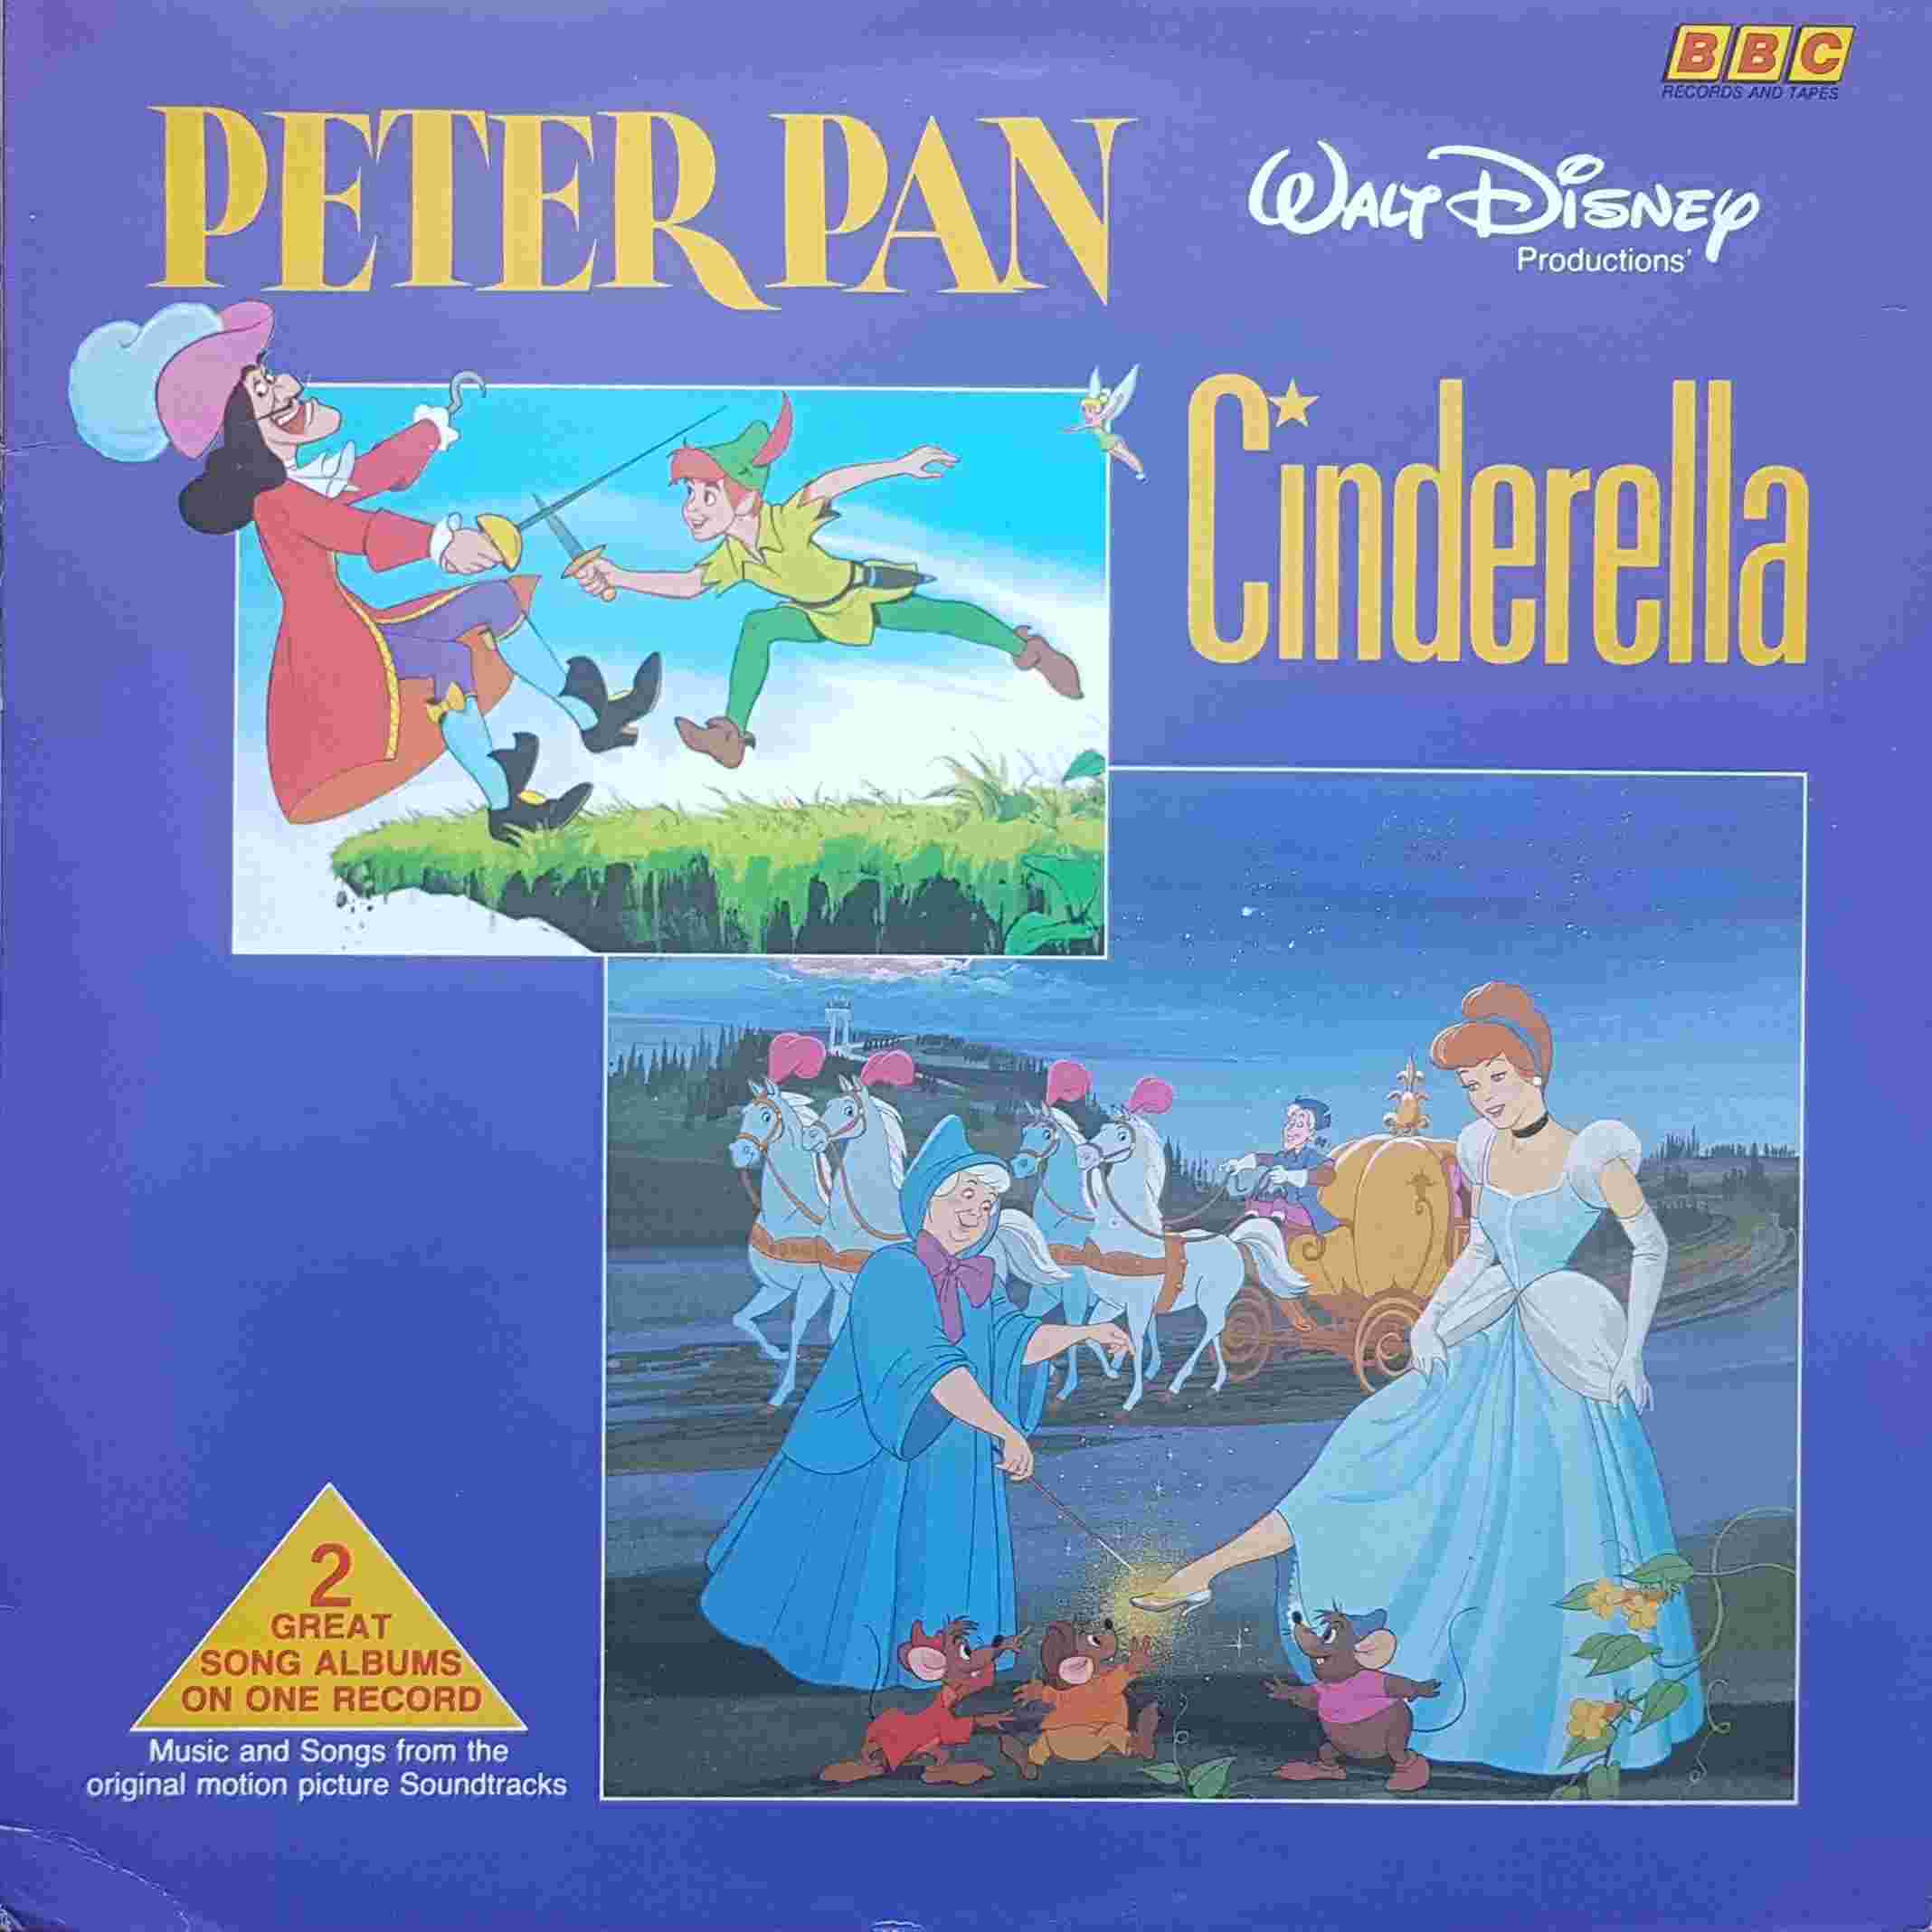 Picture of REC 577 Peter Pan and Cinderella by artist Various from the BBC albums - Records and Tapes library